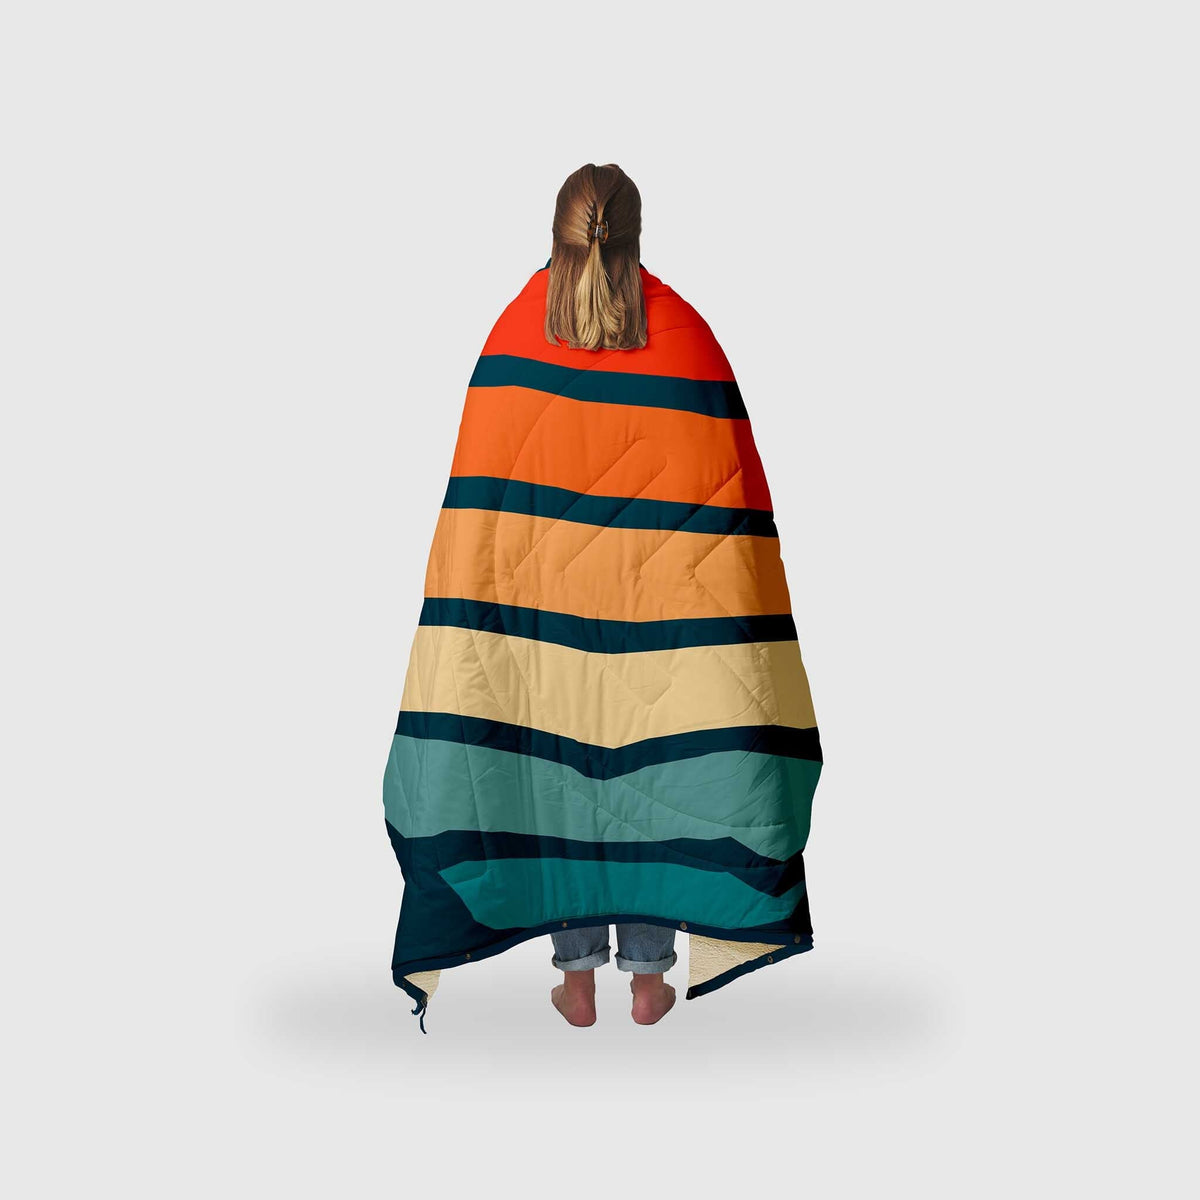 VOITED CloudTouch® Indoor/Outdoor Camping Blanket - Sunset Stripes